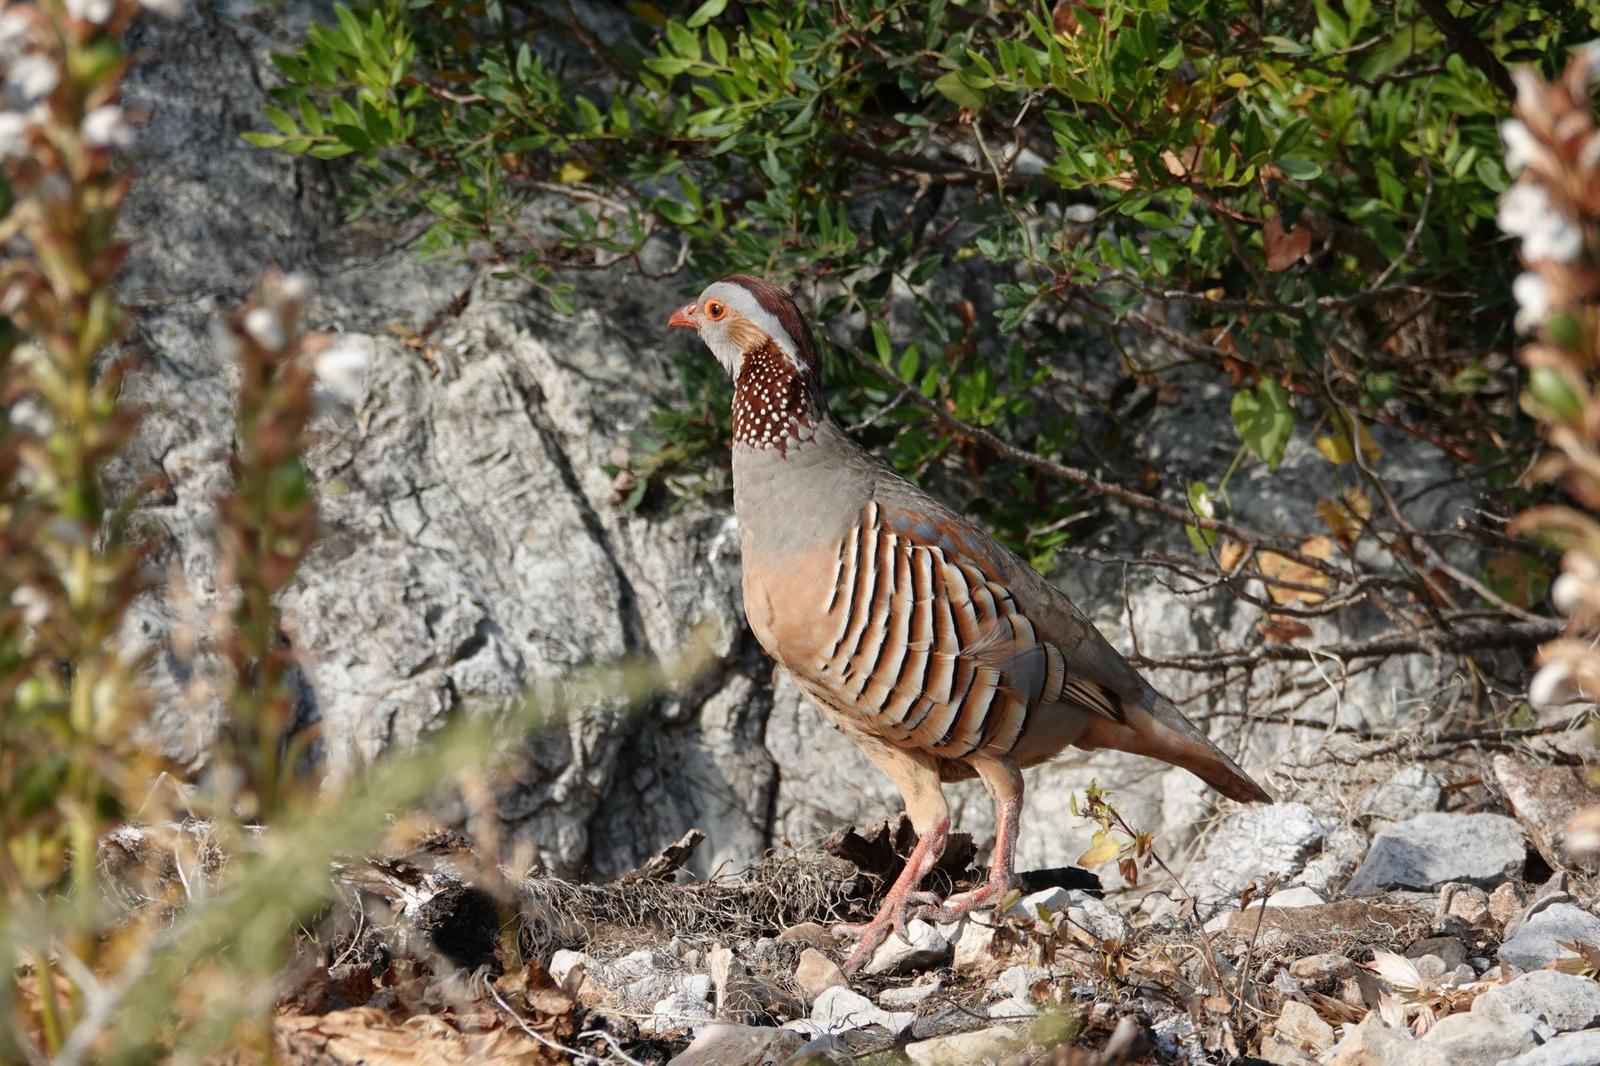 Barbary Partridge Photo by Bonnie Clarfield-Bylin